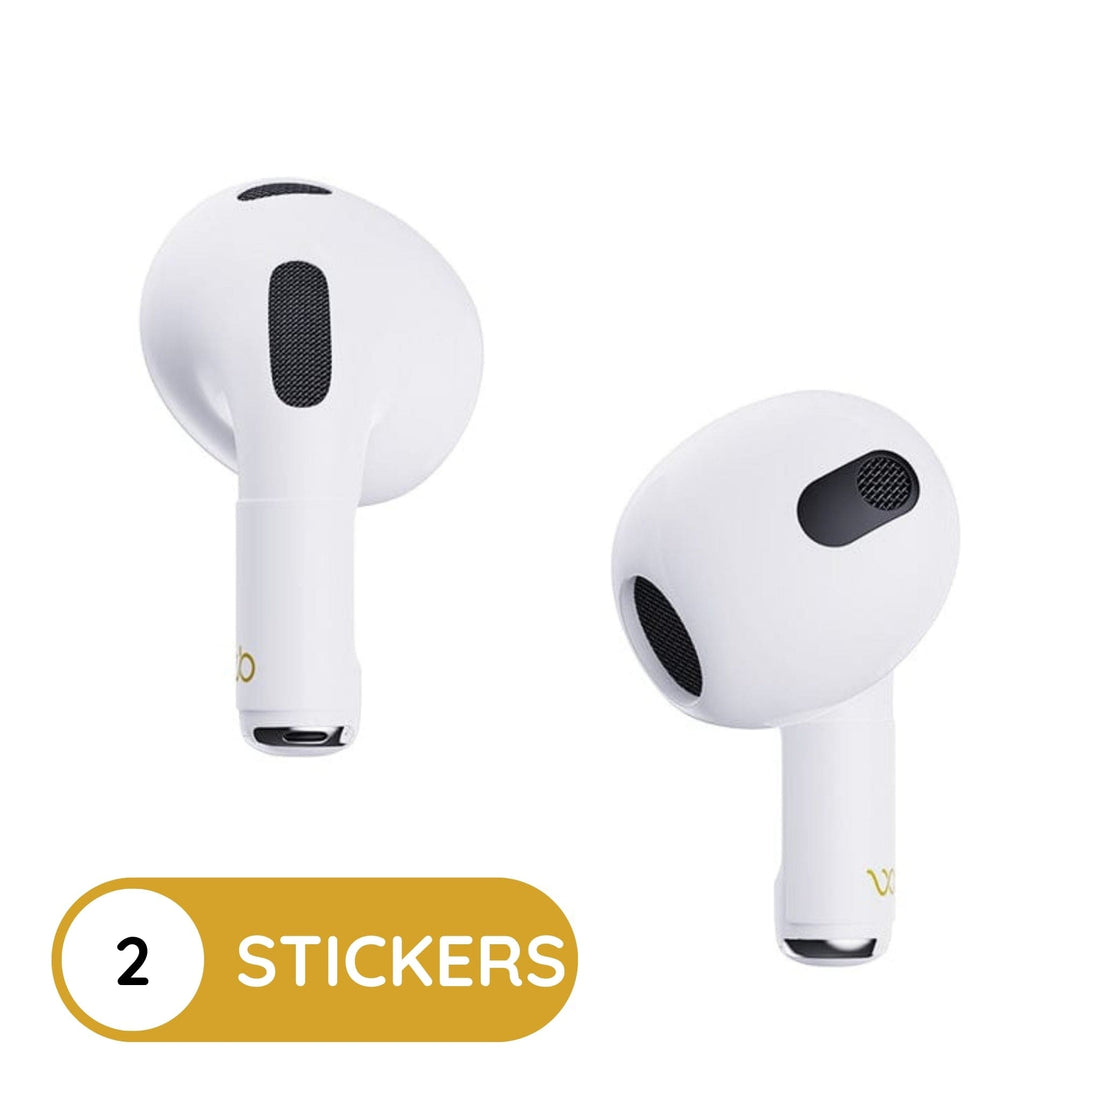 The Best EMF Radiation Protection Stickers for iPhones, AirPods, MacBooks, iPads, Samsungs | WaveBlock™️ | 5G Cell Phone Shield